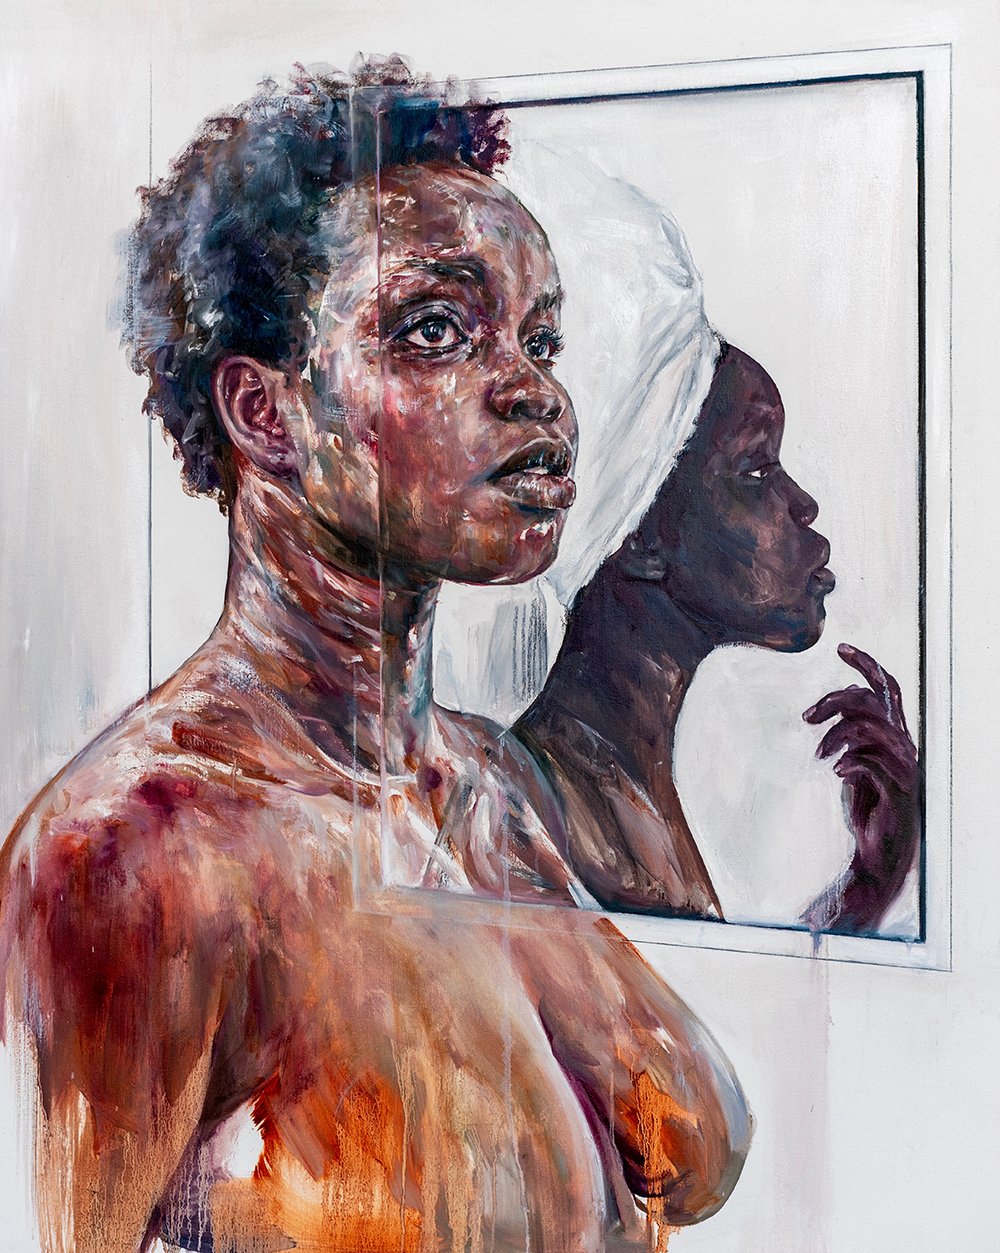 Image of Atong with her self portrait